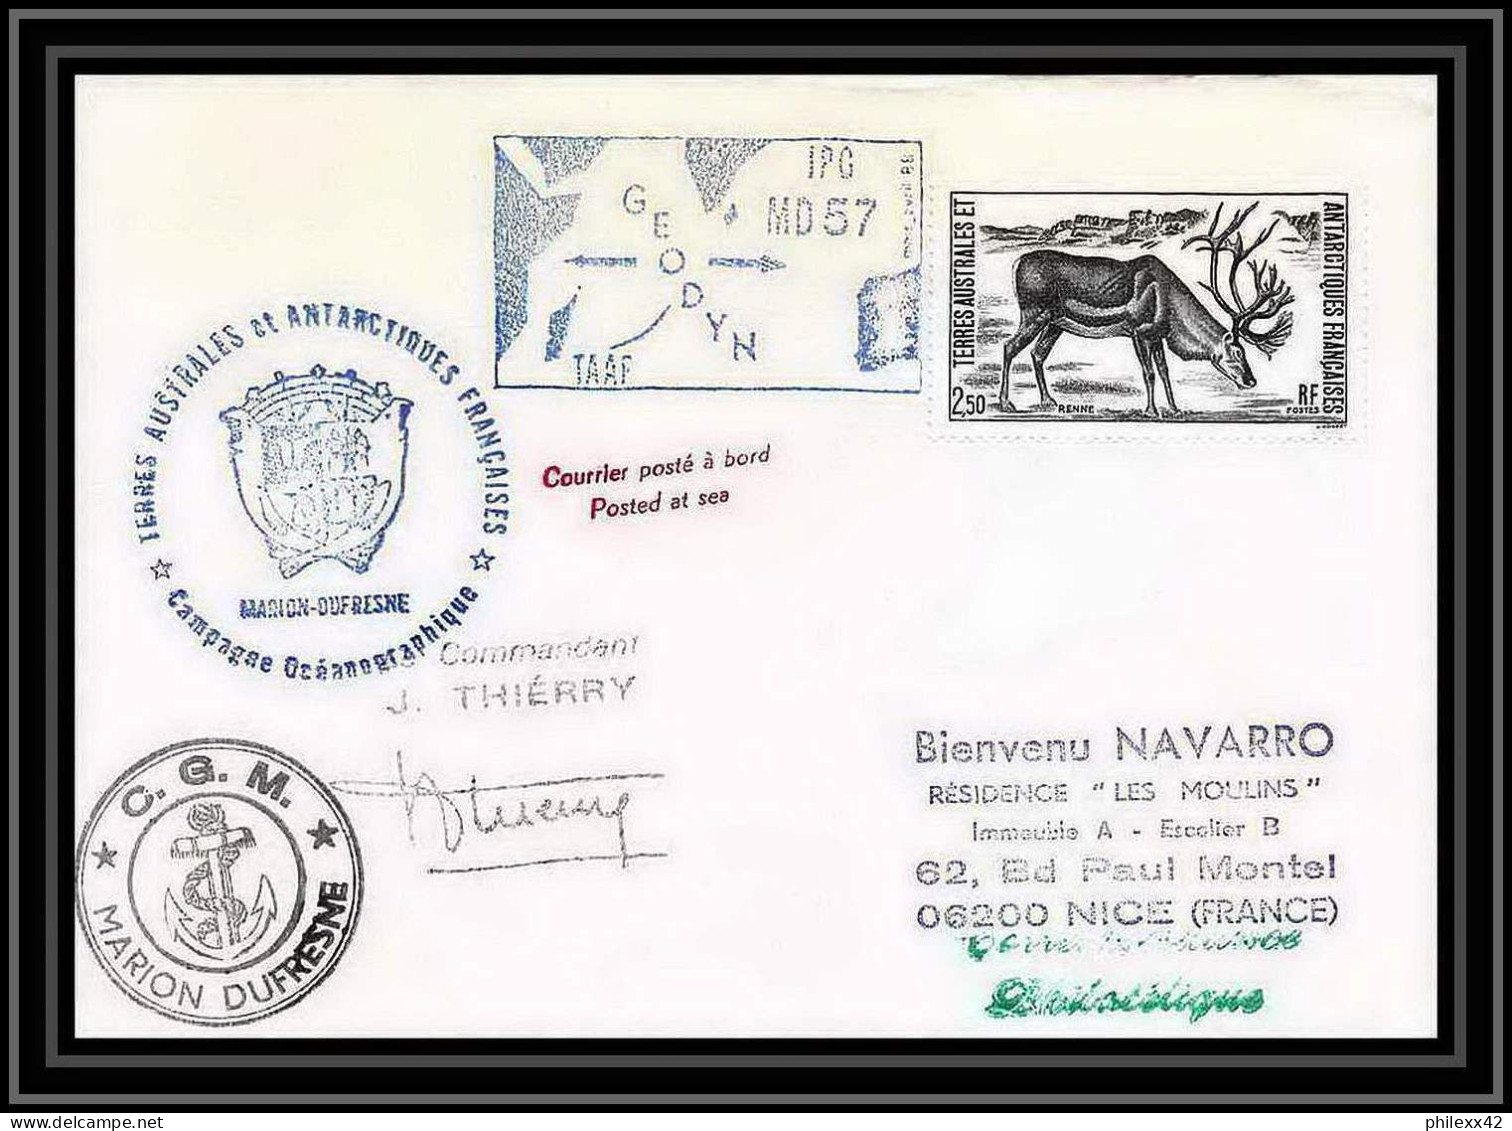 1558 Geodyn Md 57 Marion Dufresne 21/4/1988 Signé Signed Thierry TAAF Antarctic Terres Australes Lettre (cover) - Antarctische Expedities